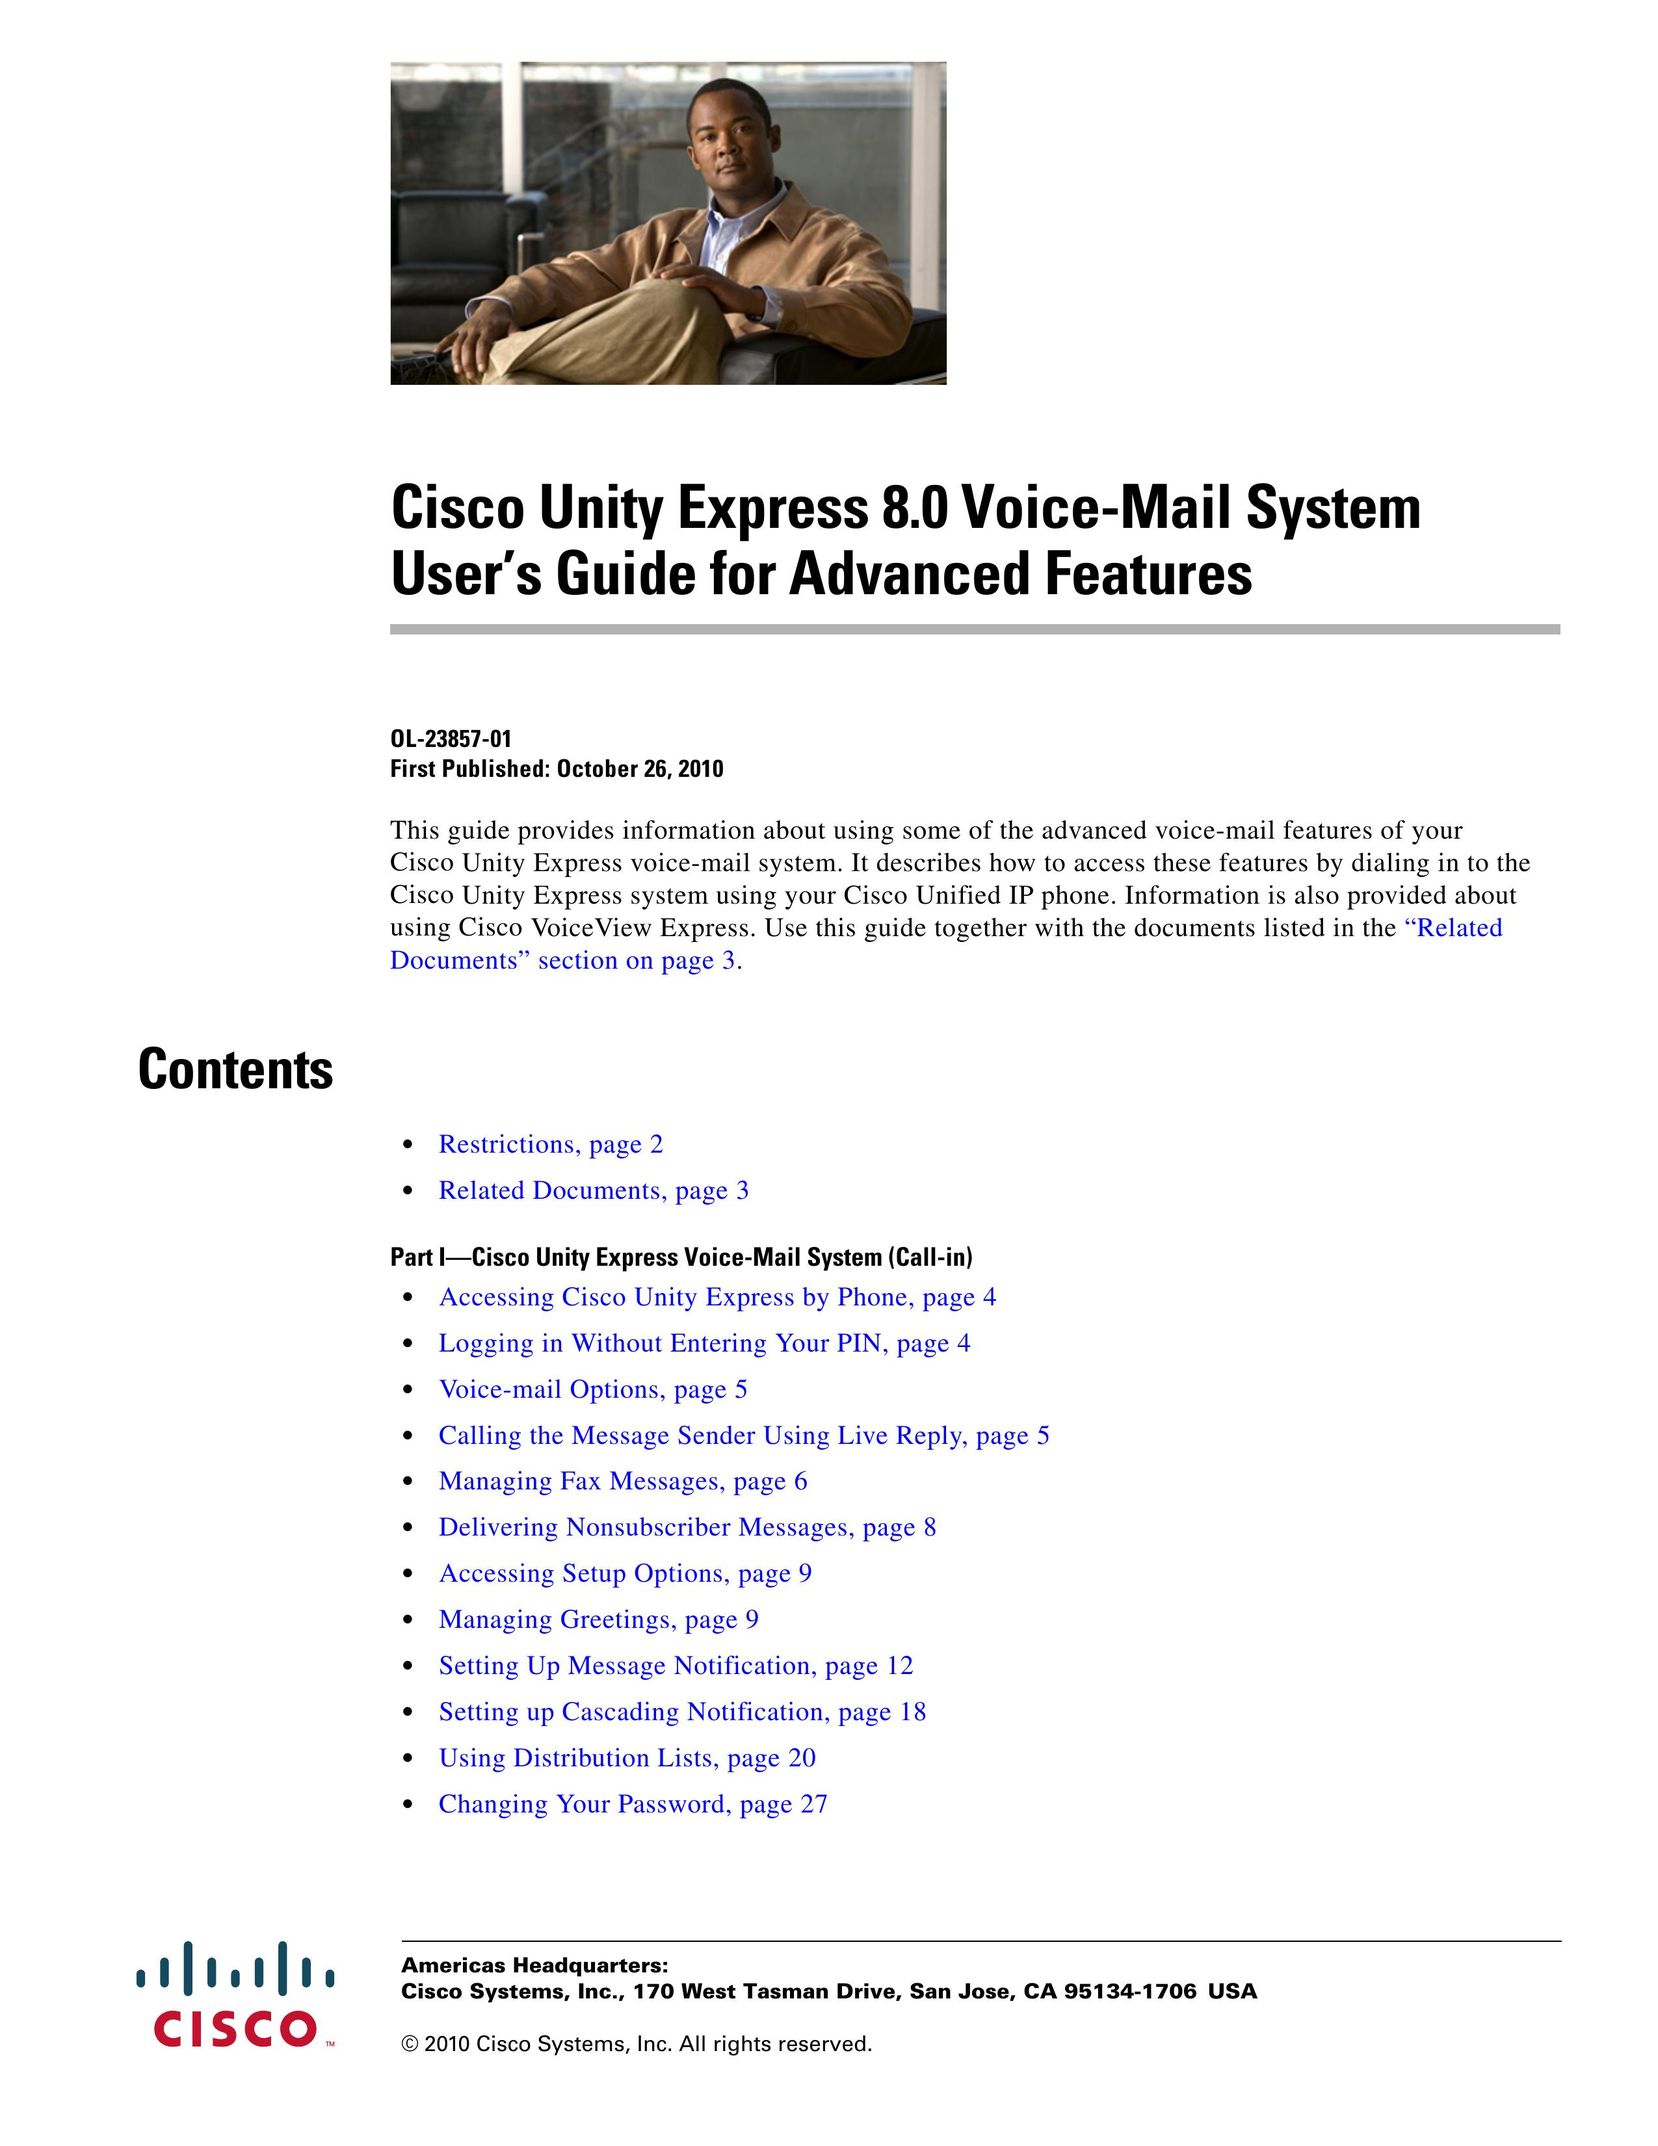 Cisco Systems OL-23857-01 Answering Machine User Manual (Page 1)